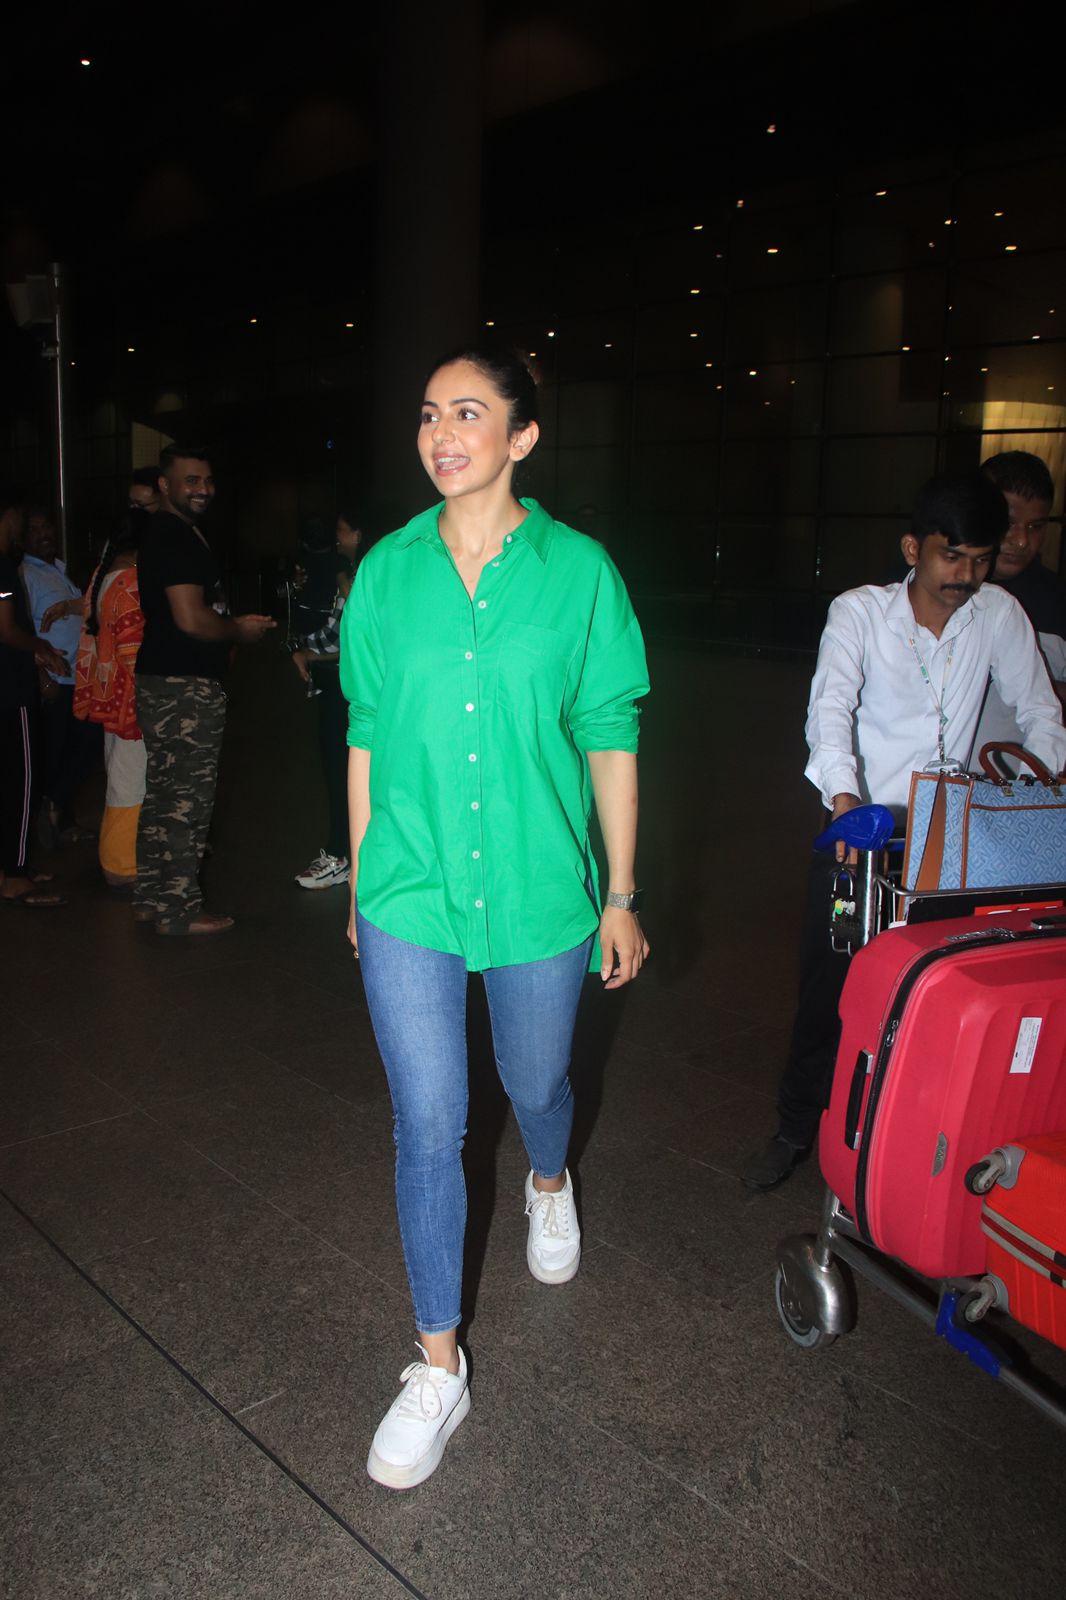 Rakul Preet Singh opted for a green top and blue jeans for her comfy airport look